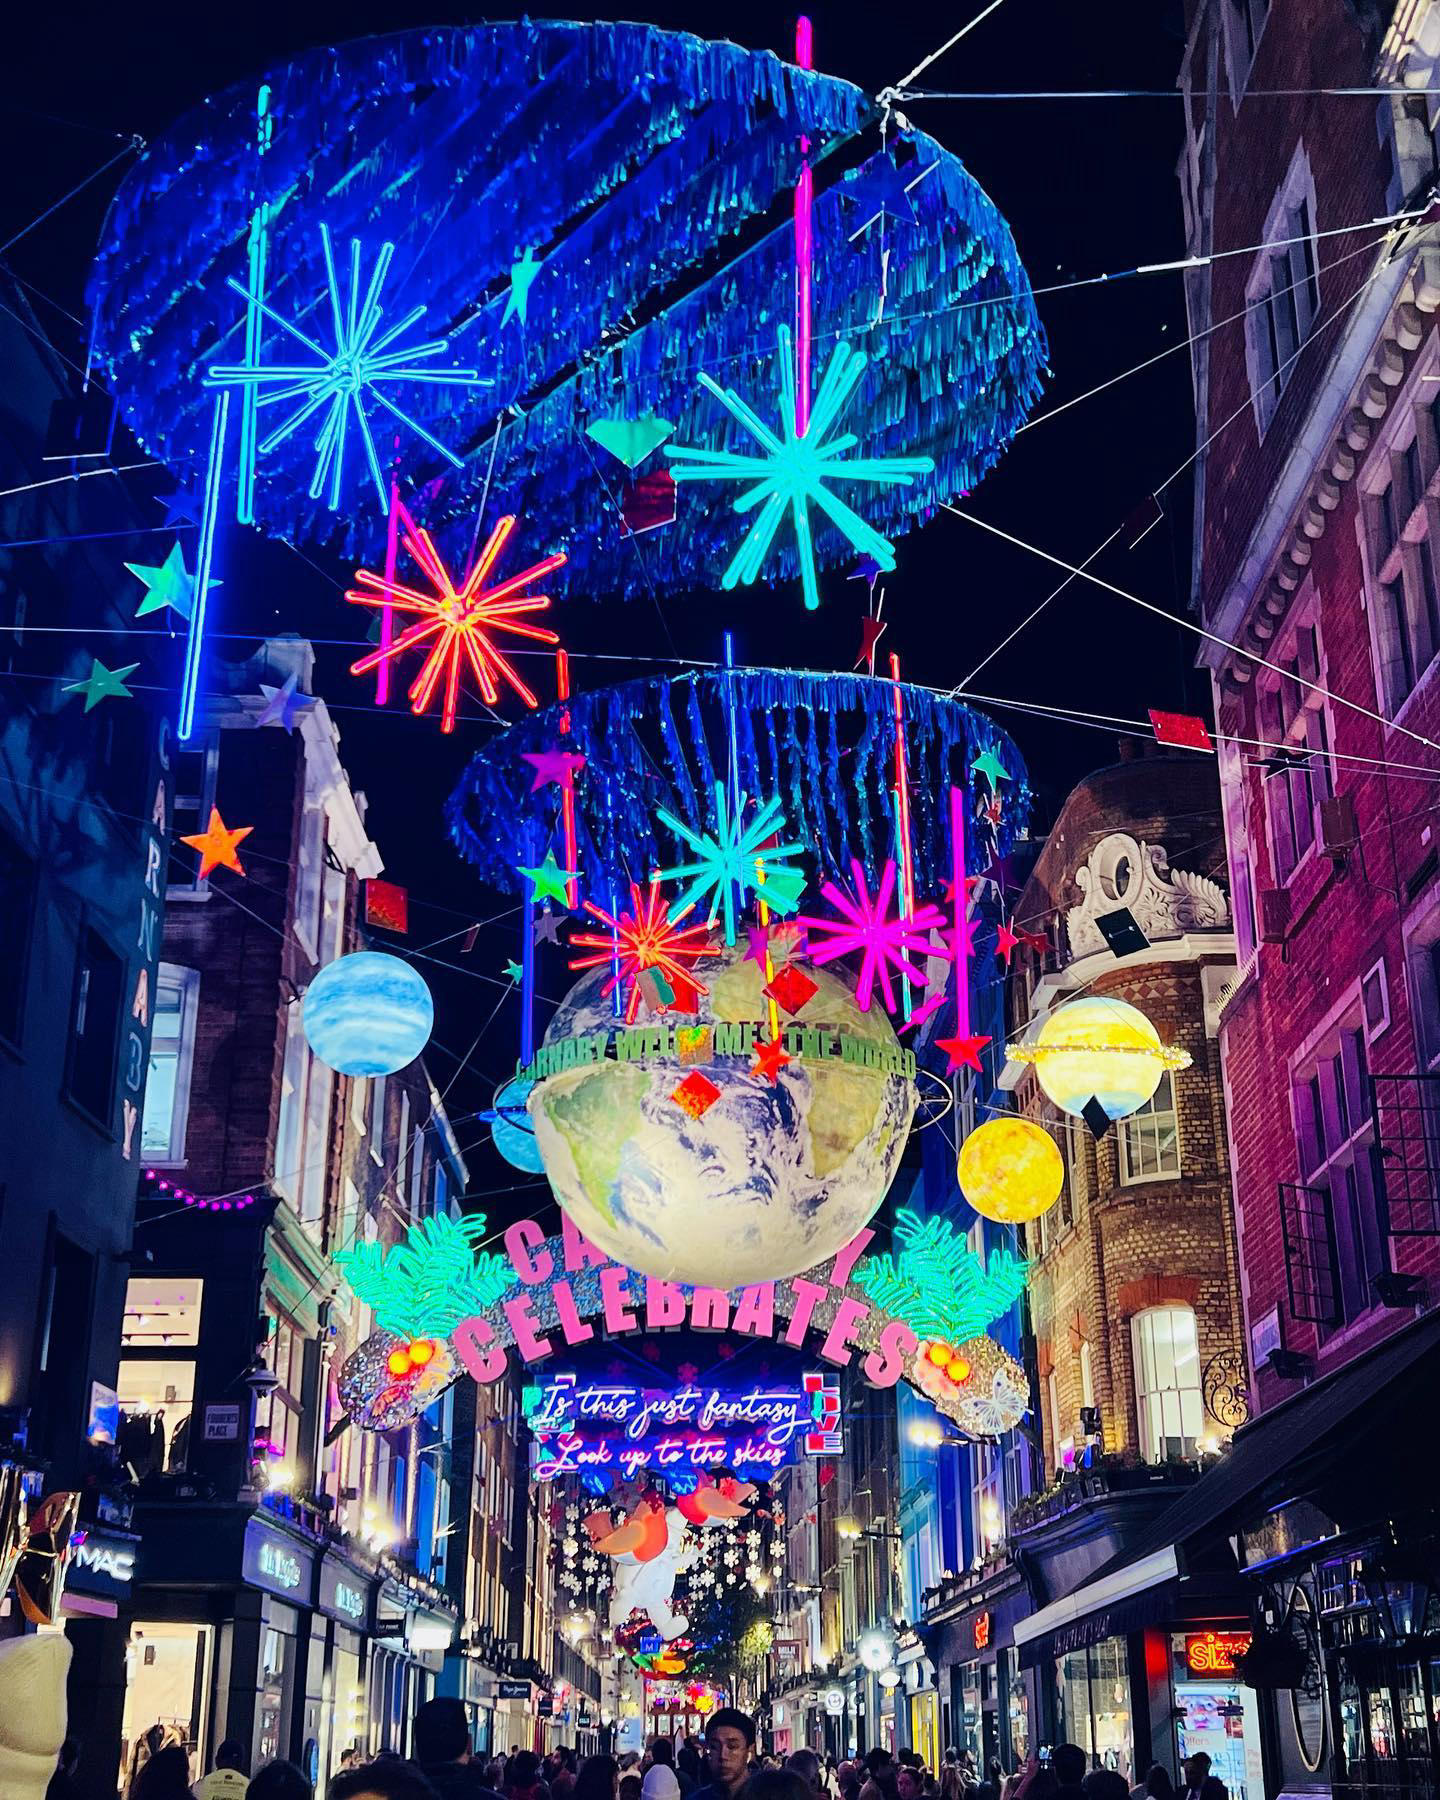 Every year, Carnaby Street continues to be my favourite Christmas lights display